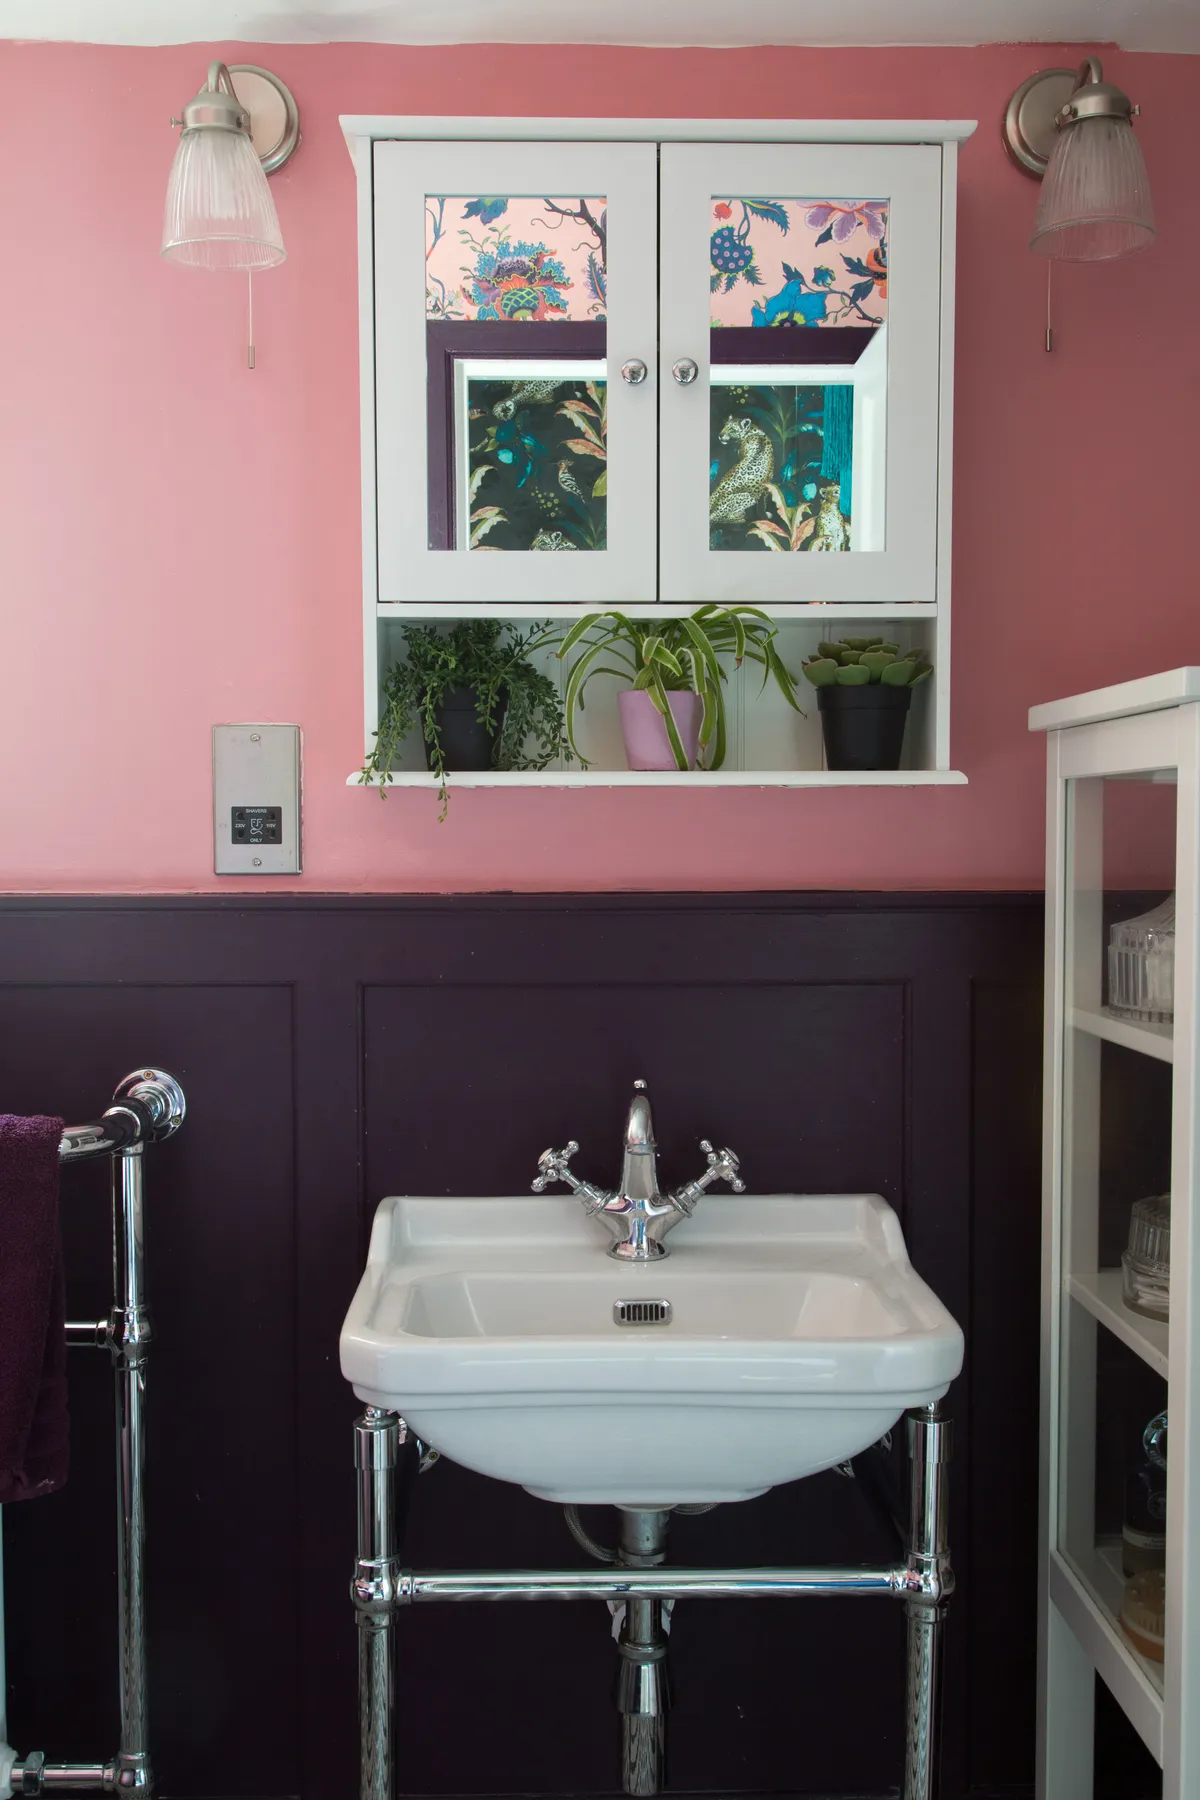 Kate’s renovated bathroom suits her home’s period charm. ‘We rebuilt the space and gave it a modern Victorian look with monochrome tiles and pink trim,’ she explains